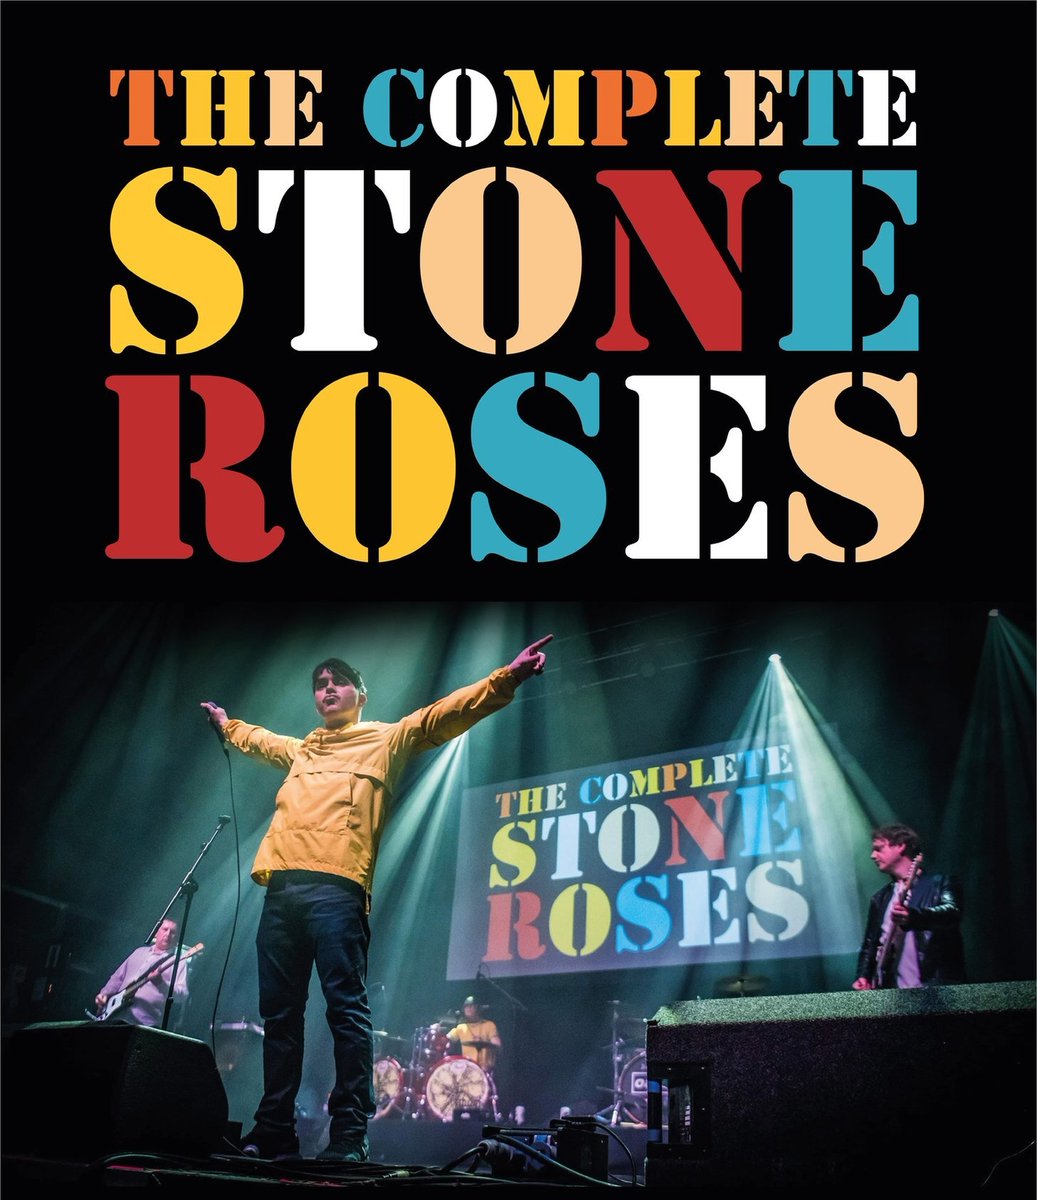 𝗢 𝗡 • 𝗦 𝗔 𝗟 𝗘 • 𝗡 𝗢 𝗪 The Complete Stone Roses Sunday 4 August (Bank Holiday) Set Theatre Kilkenny Tickets set.ticketsolve.com/shows/11736530… The Complete Stone Roses are one of the UK’s most well-known, most seen and most successful tribute bands